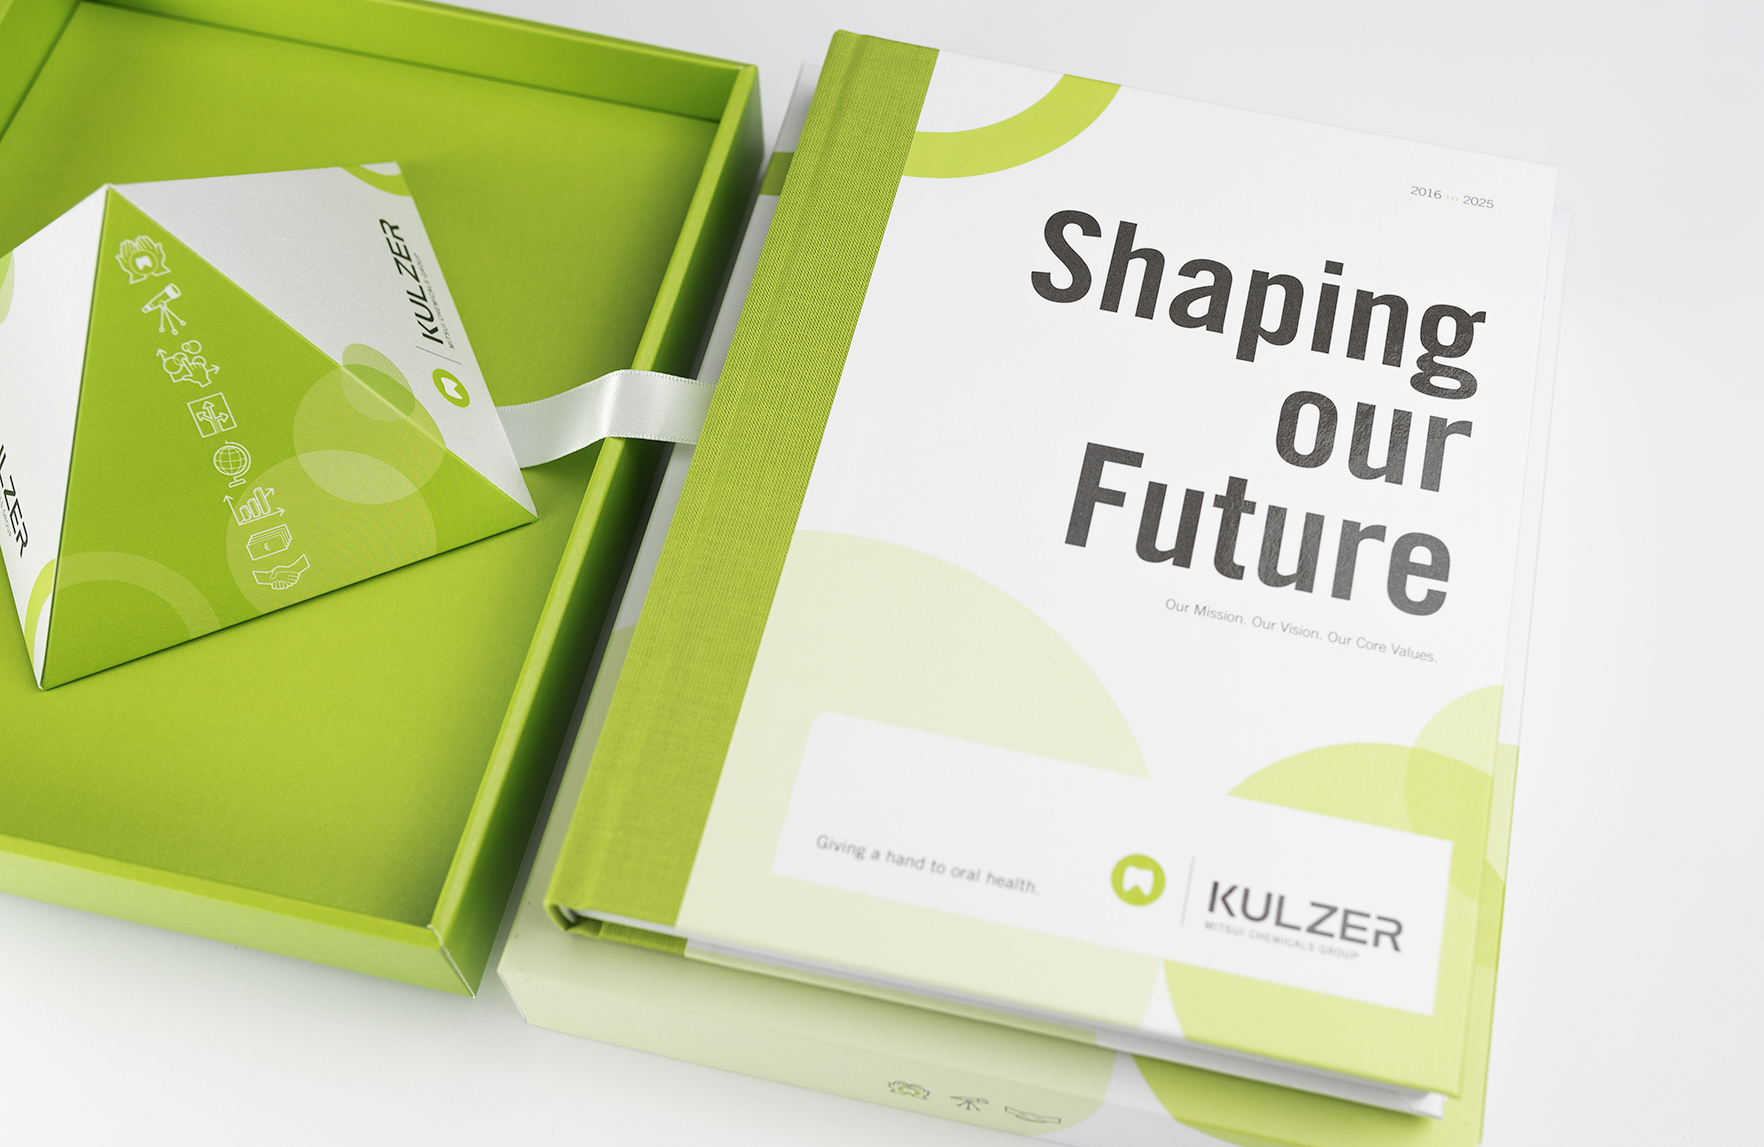 Shaping the Future. KULZER MITSUI CHEMICALS GROUP